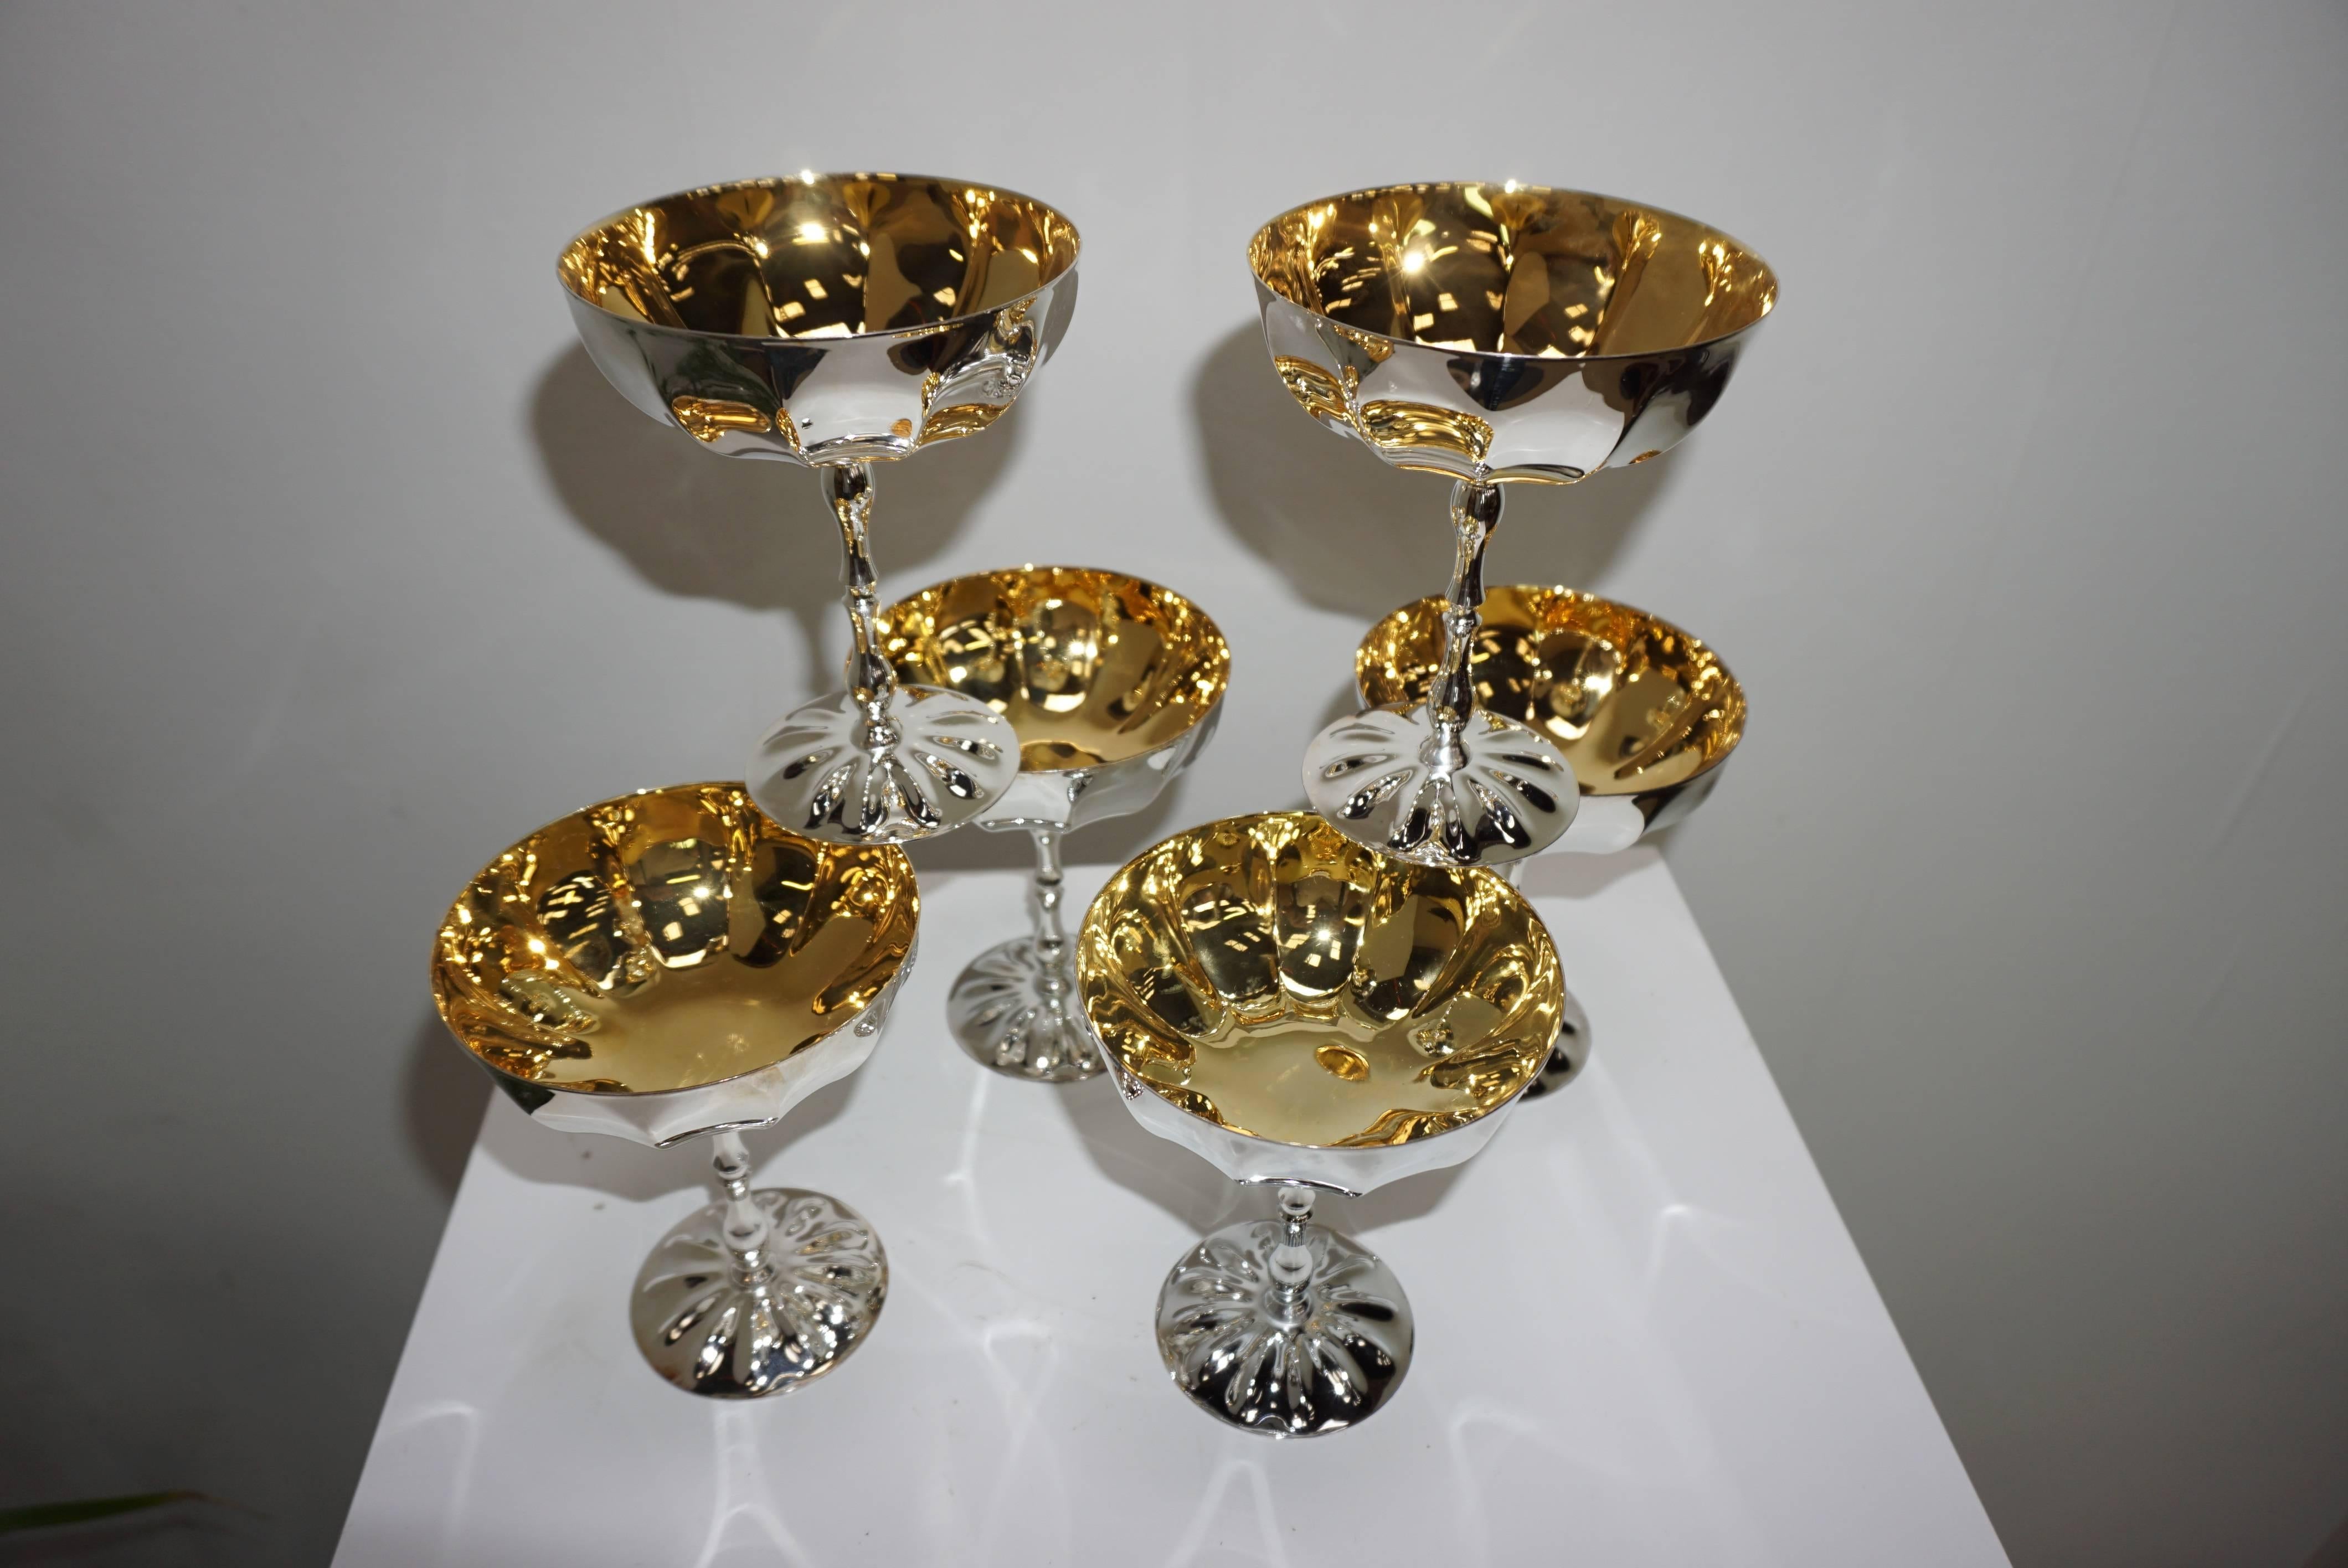 Set of 6, 24-karat gold-plated and silver plated cups. Straight from a European palace, these dishes have never served. They can be served for wonderful desserts as well as served a vintage champagne.
Several sets available.
  